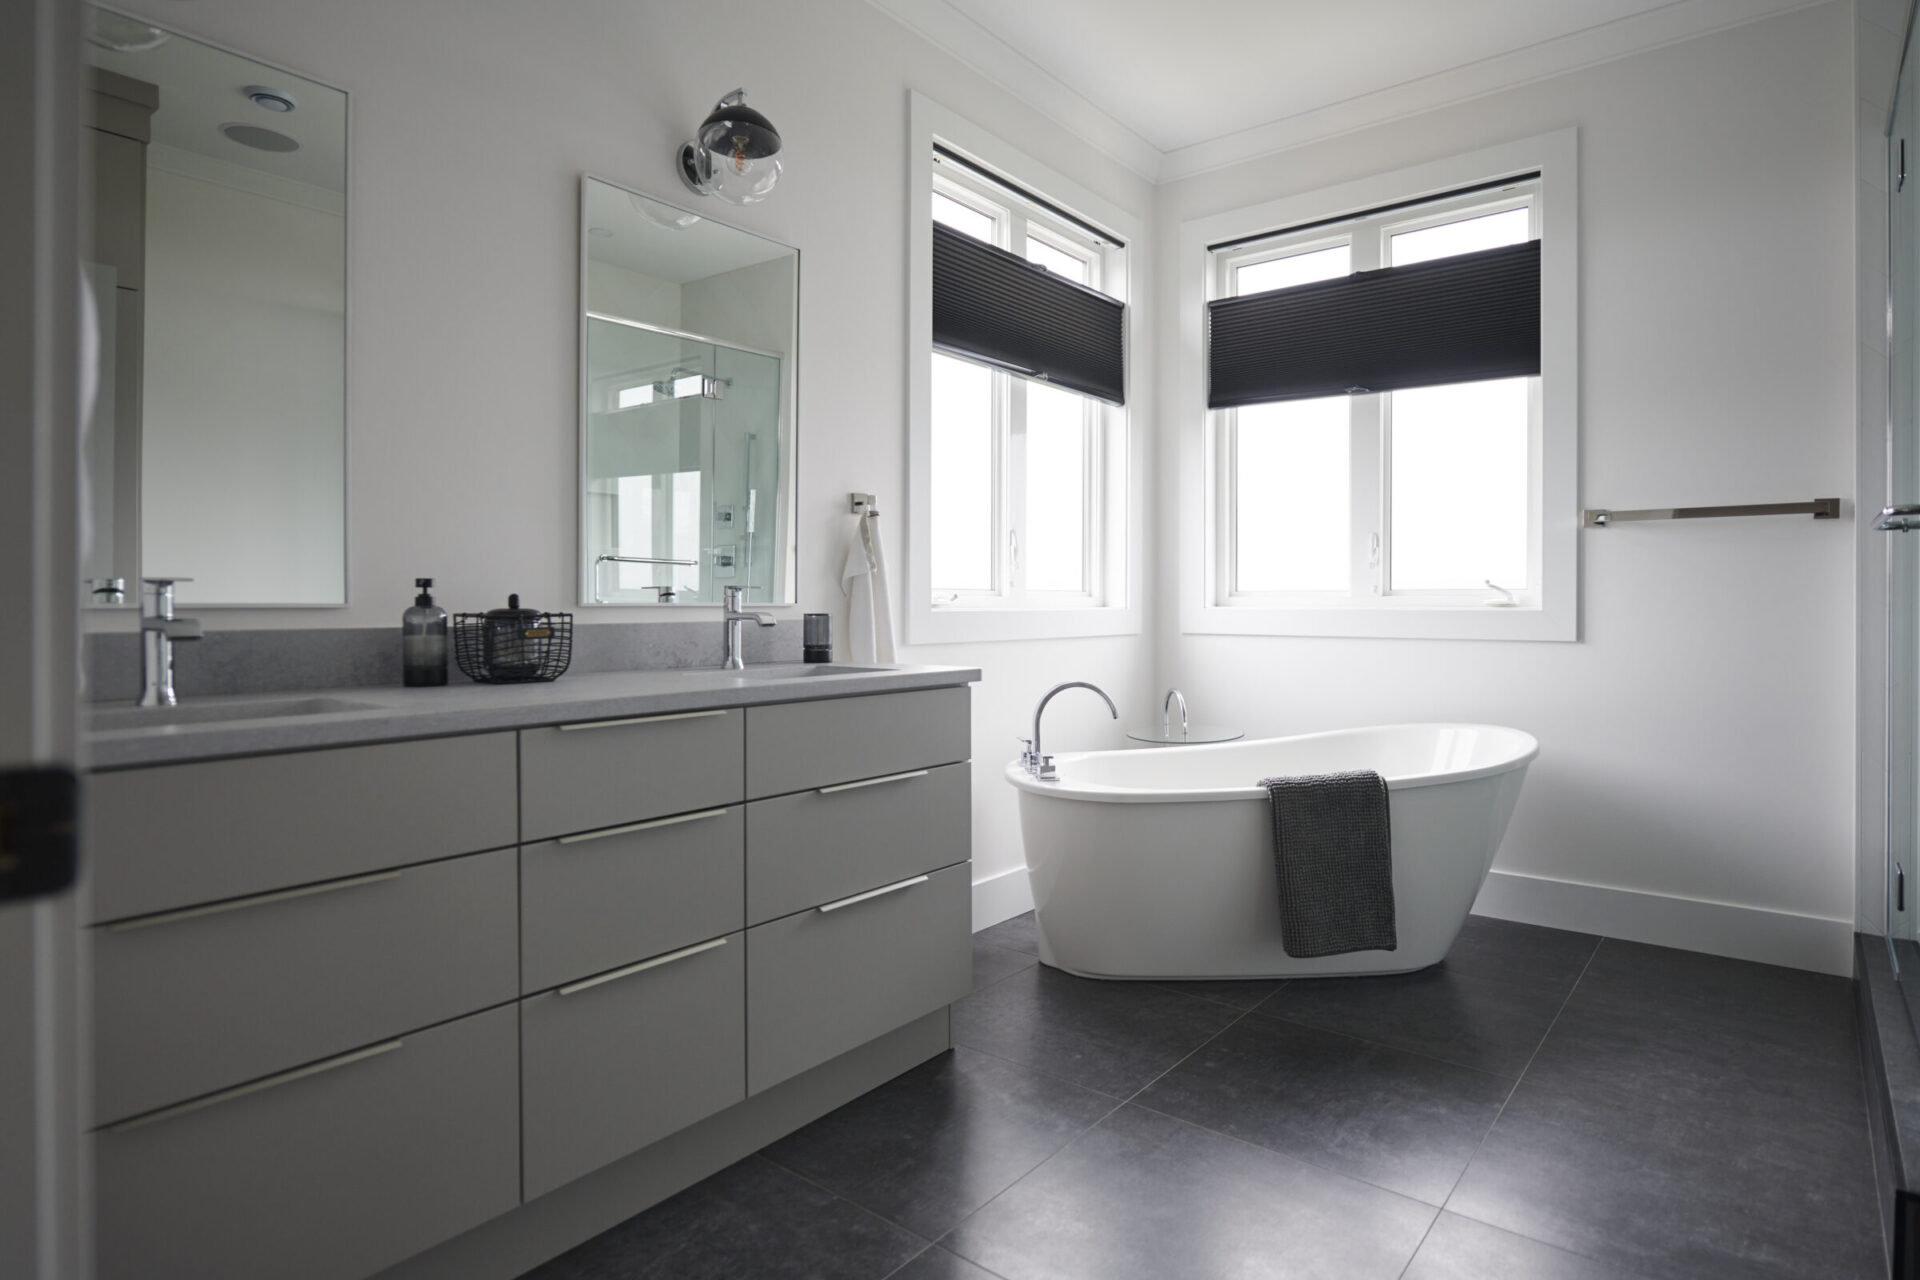 This is a modern, clean bathroom with a large mirror, a double sink vanity, dark floor tiles, a freestanding tub, and black window blinds.